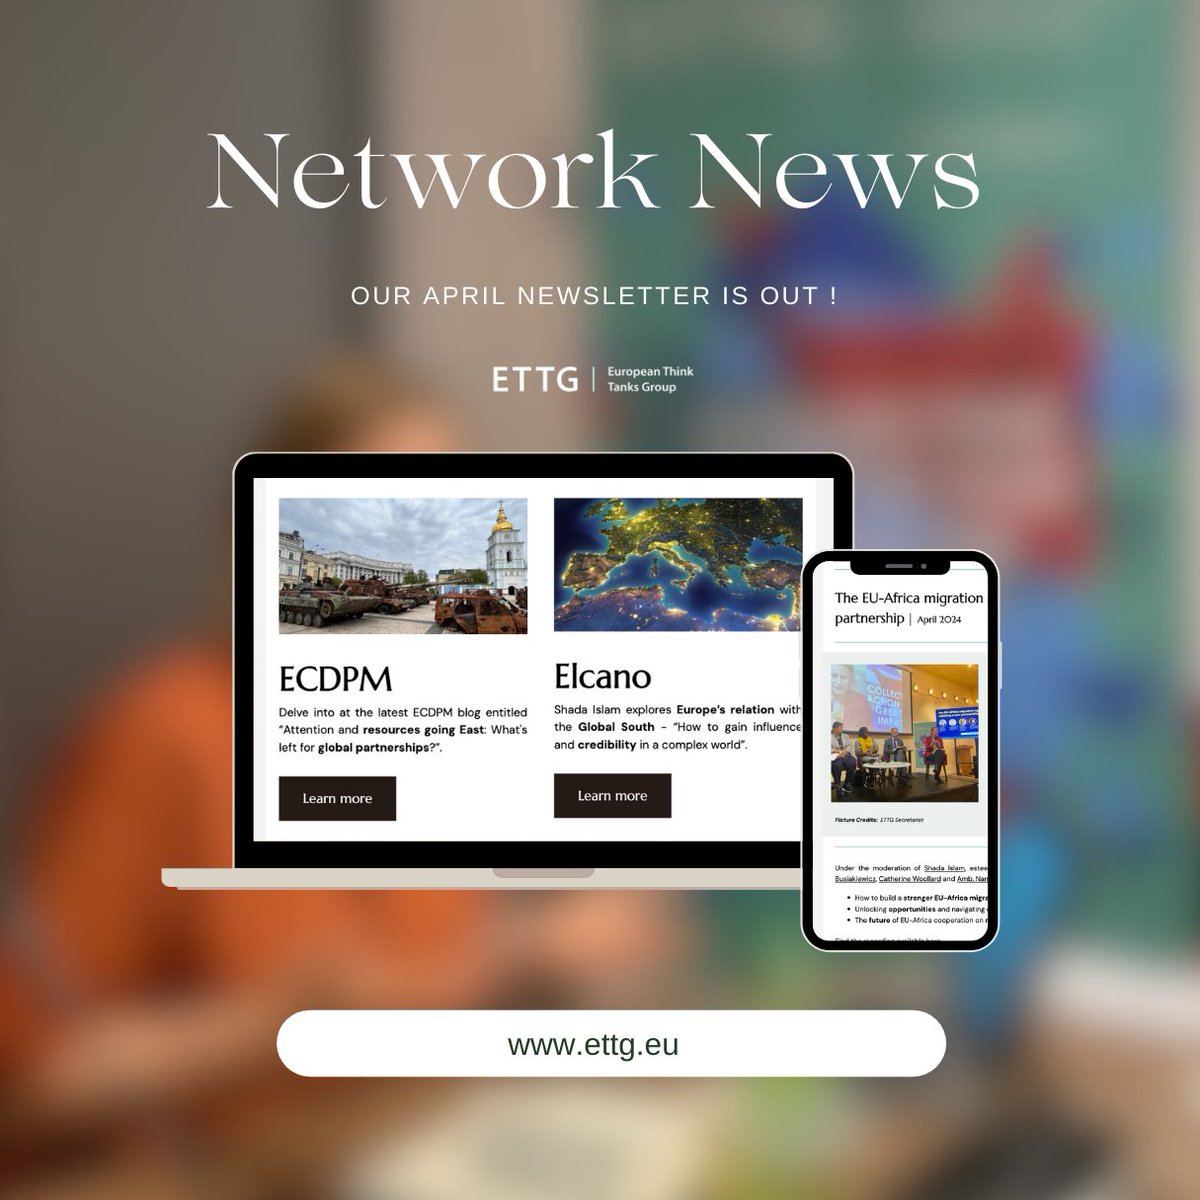 Our April newsletter is out 🌎 Explore the latest network news, events, member publications. Latest edition - bit.ly/3Qma1aM Join us if you haven't yet - bit.ly/45PJVCM